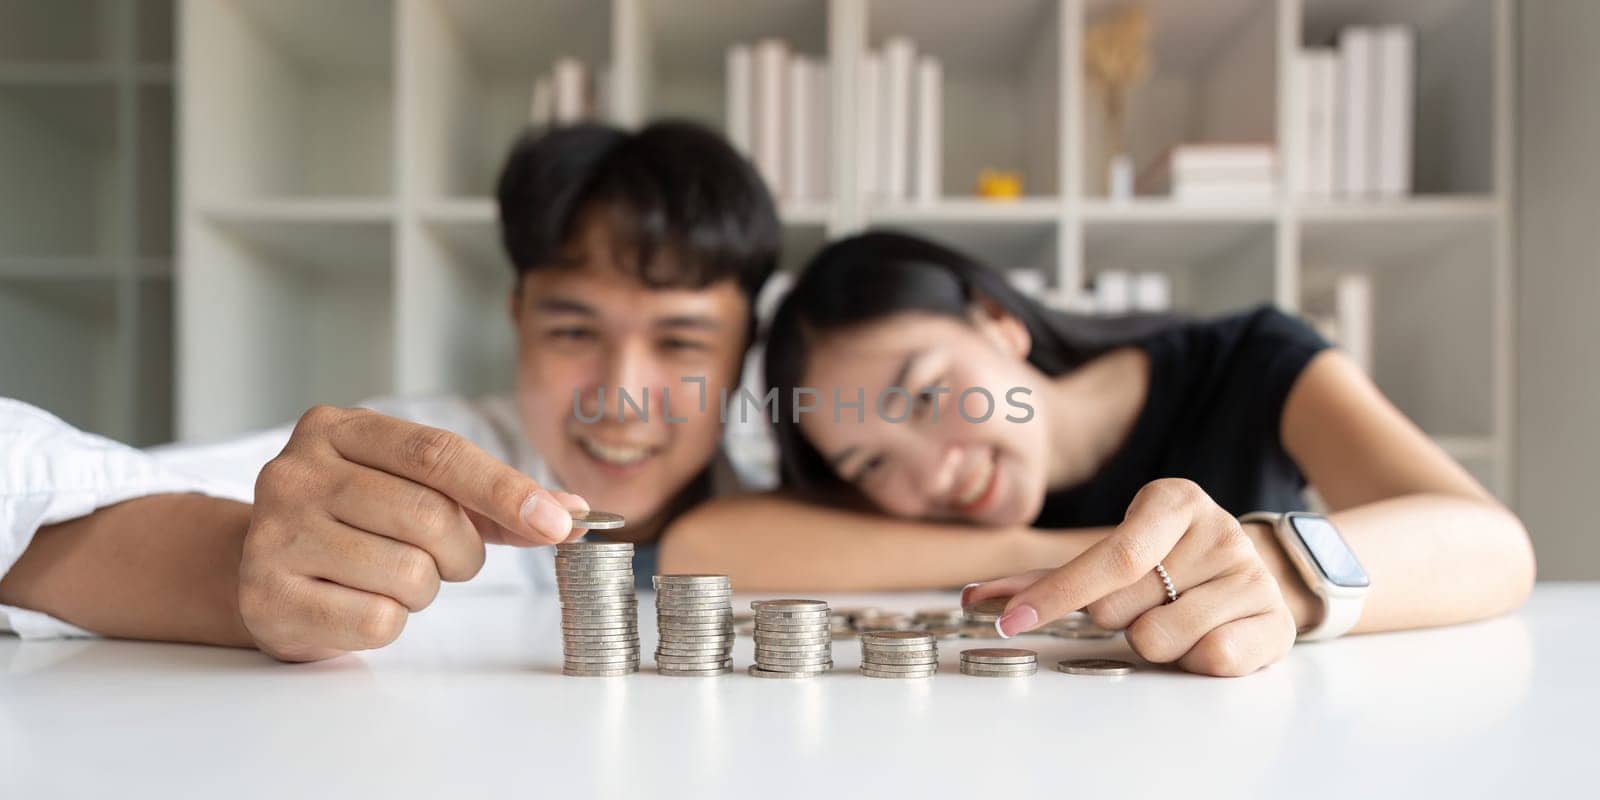 Saving money investment for future. Asian couple counting save money plan future budget. Saving investment banking concept.